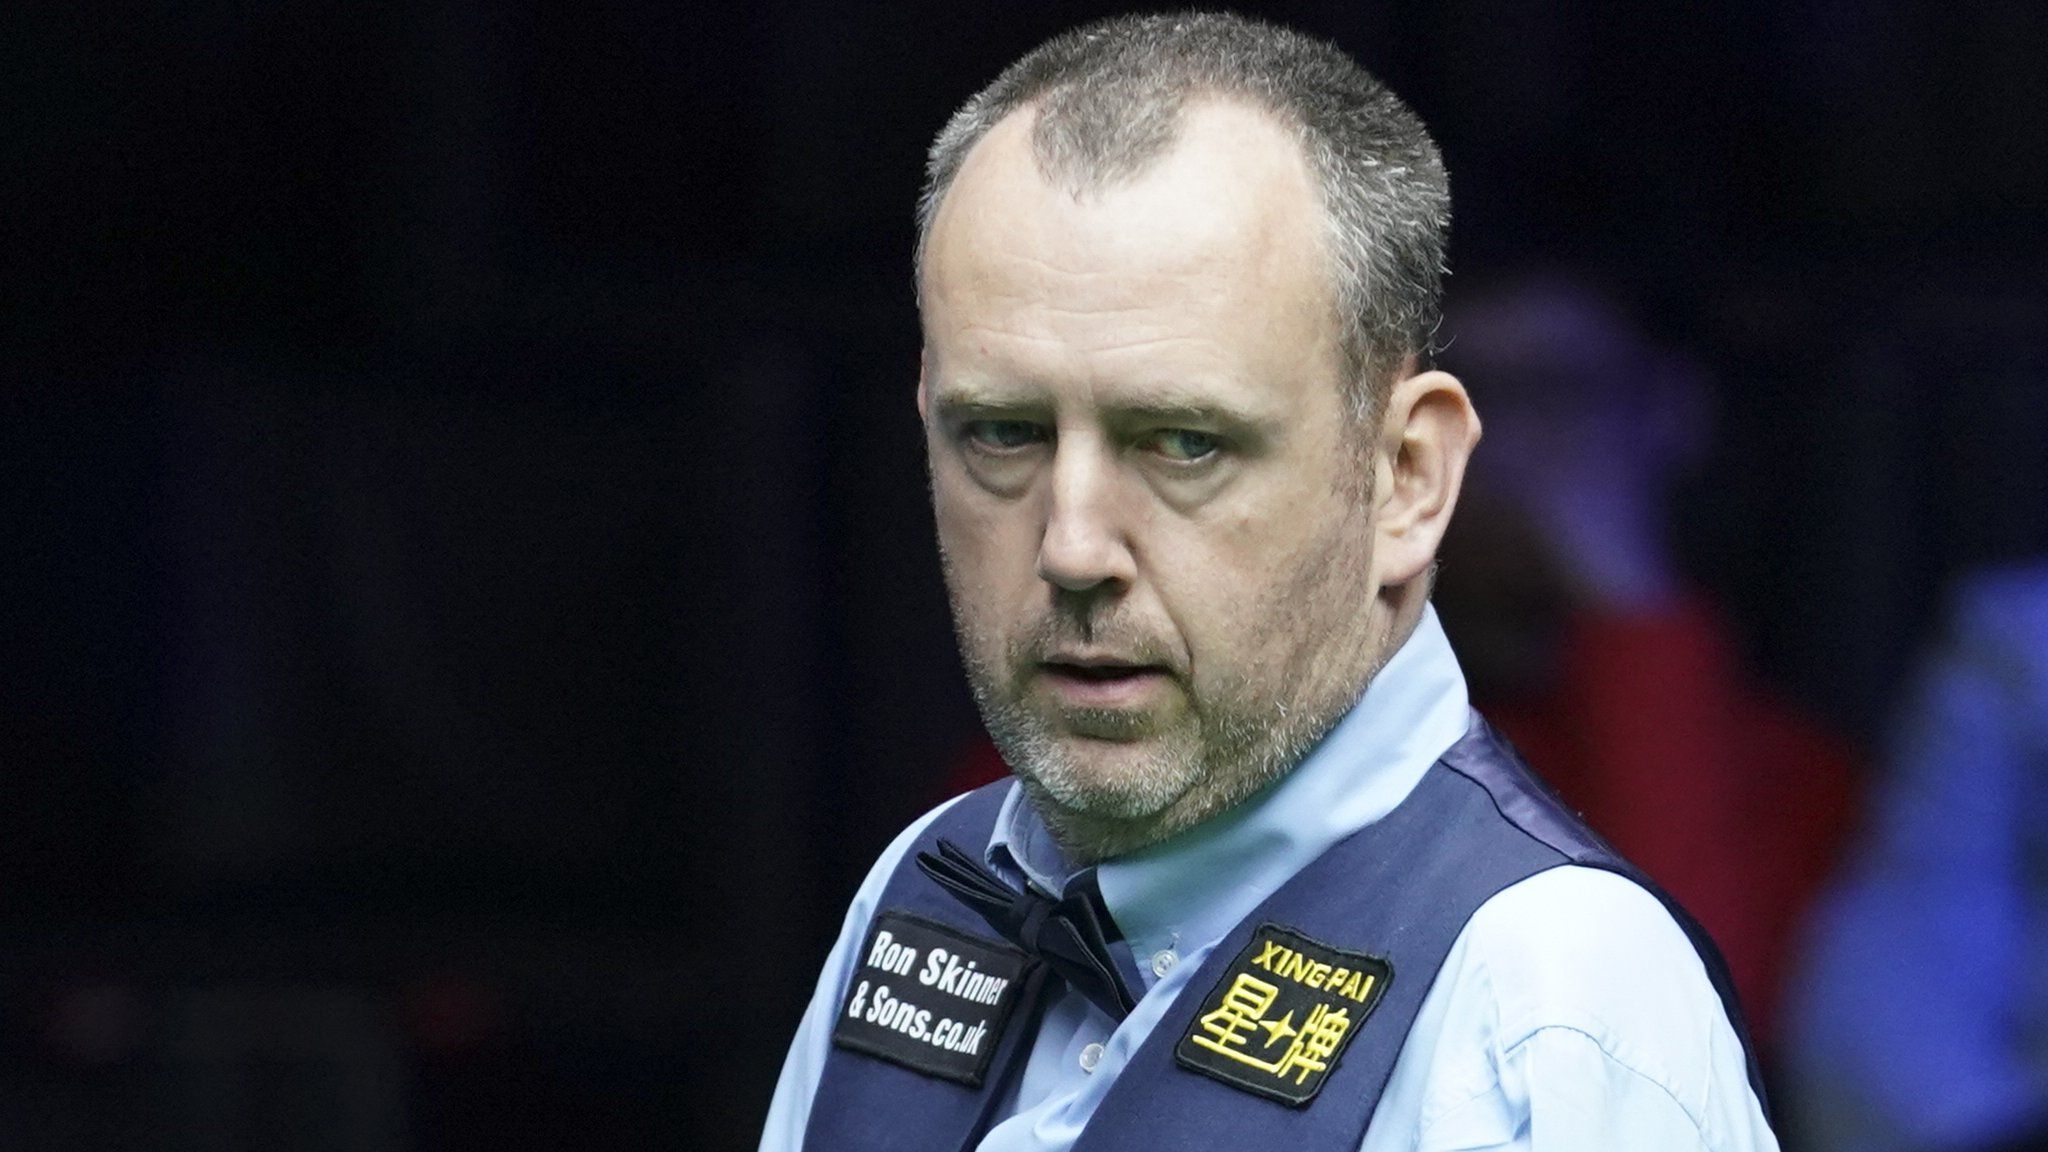 First Gareth Bale, now snooker star Mark Williams says he prefers golf